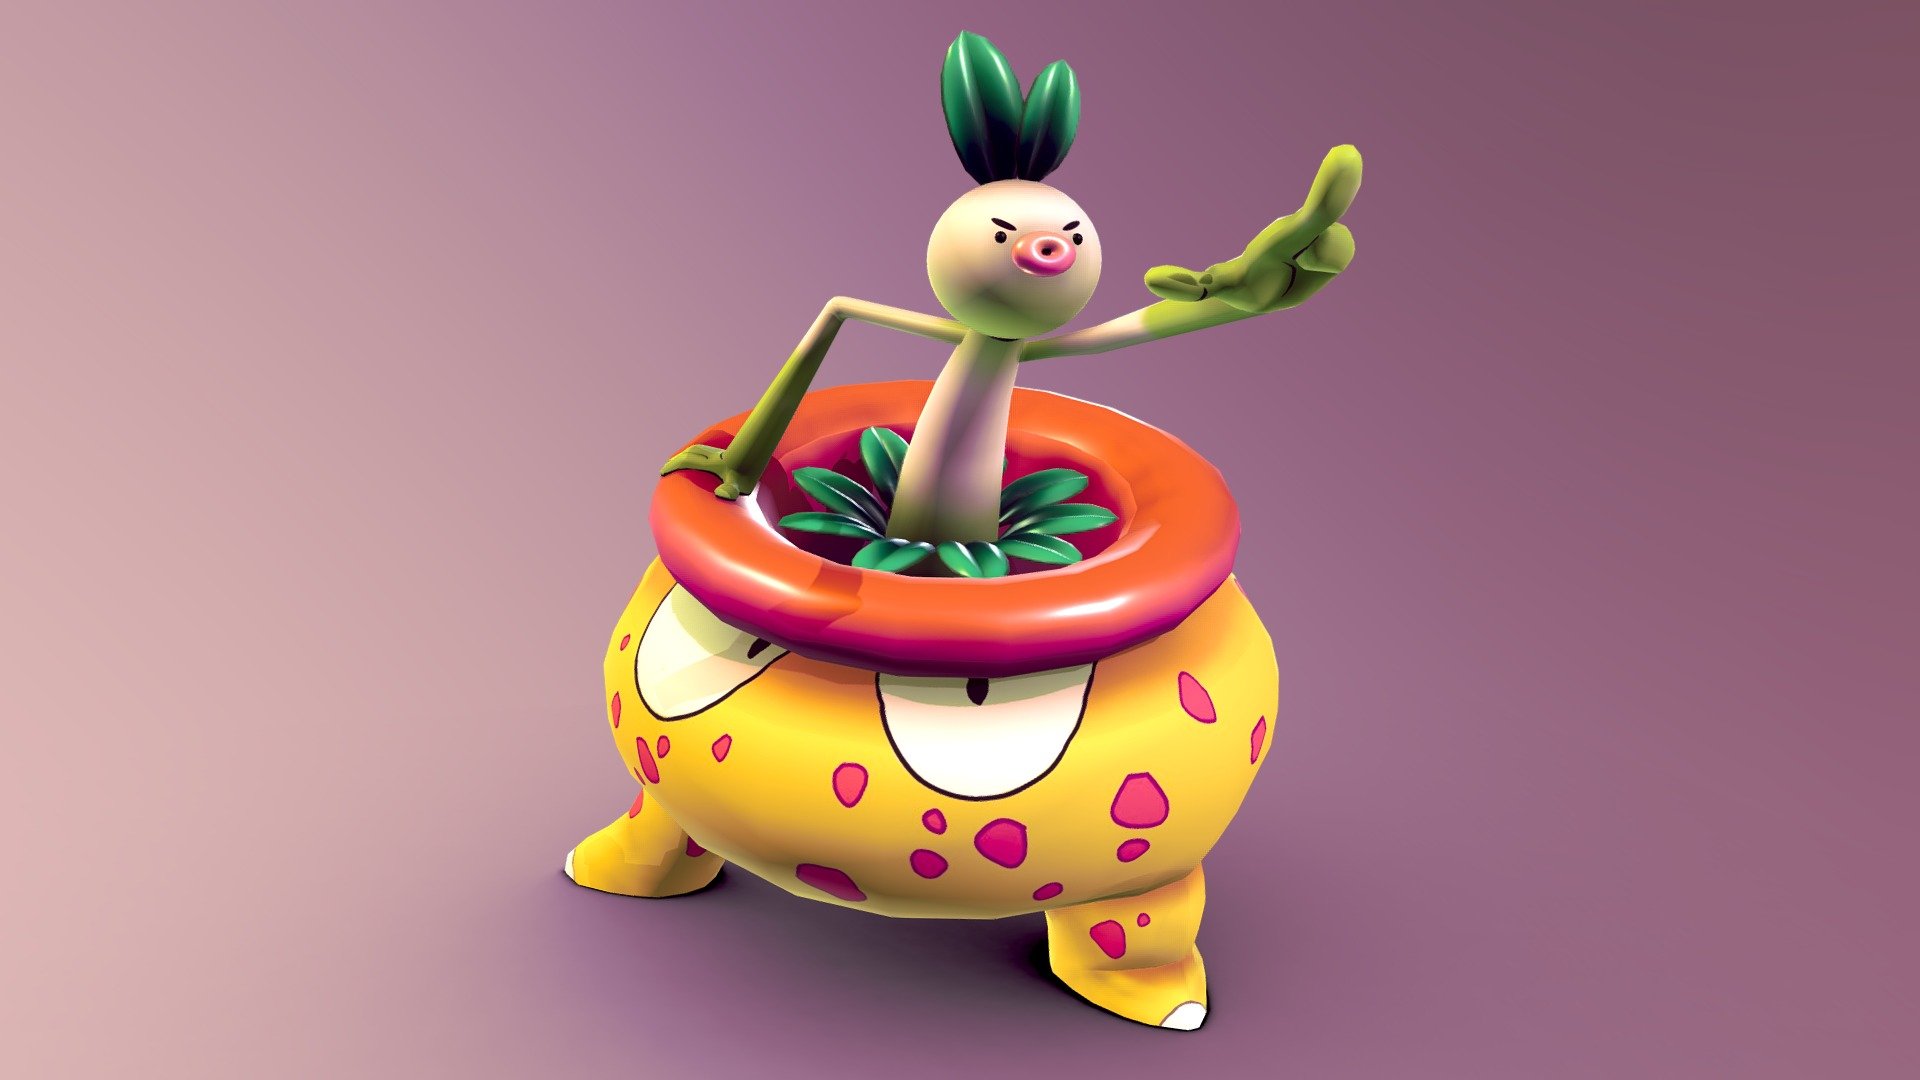 Leek and Lila originated from a challenge I participated in to make 50 characters in a single semester. You can check out the sketches of them here: https://www.artstation.com/artwork/zAQBNL - Leek and Lila - 3D model by Dex Jones (@DexJones) 3d model